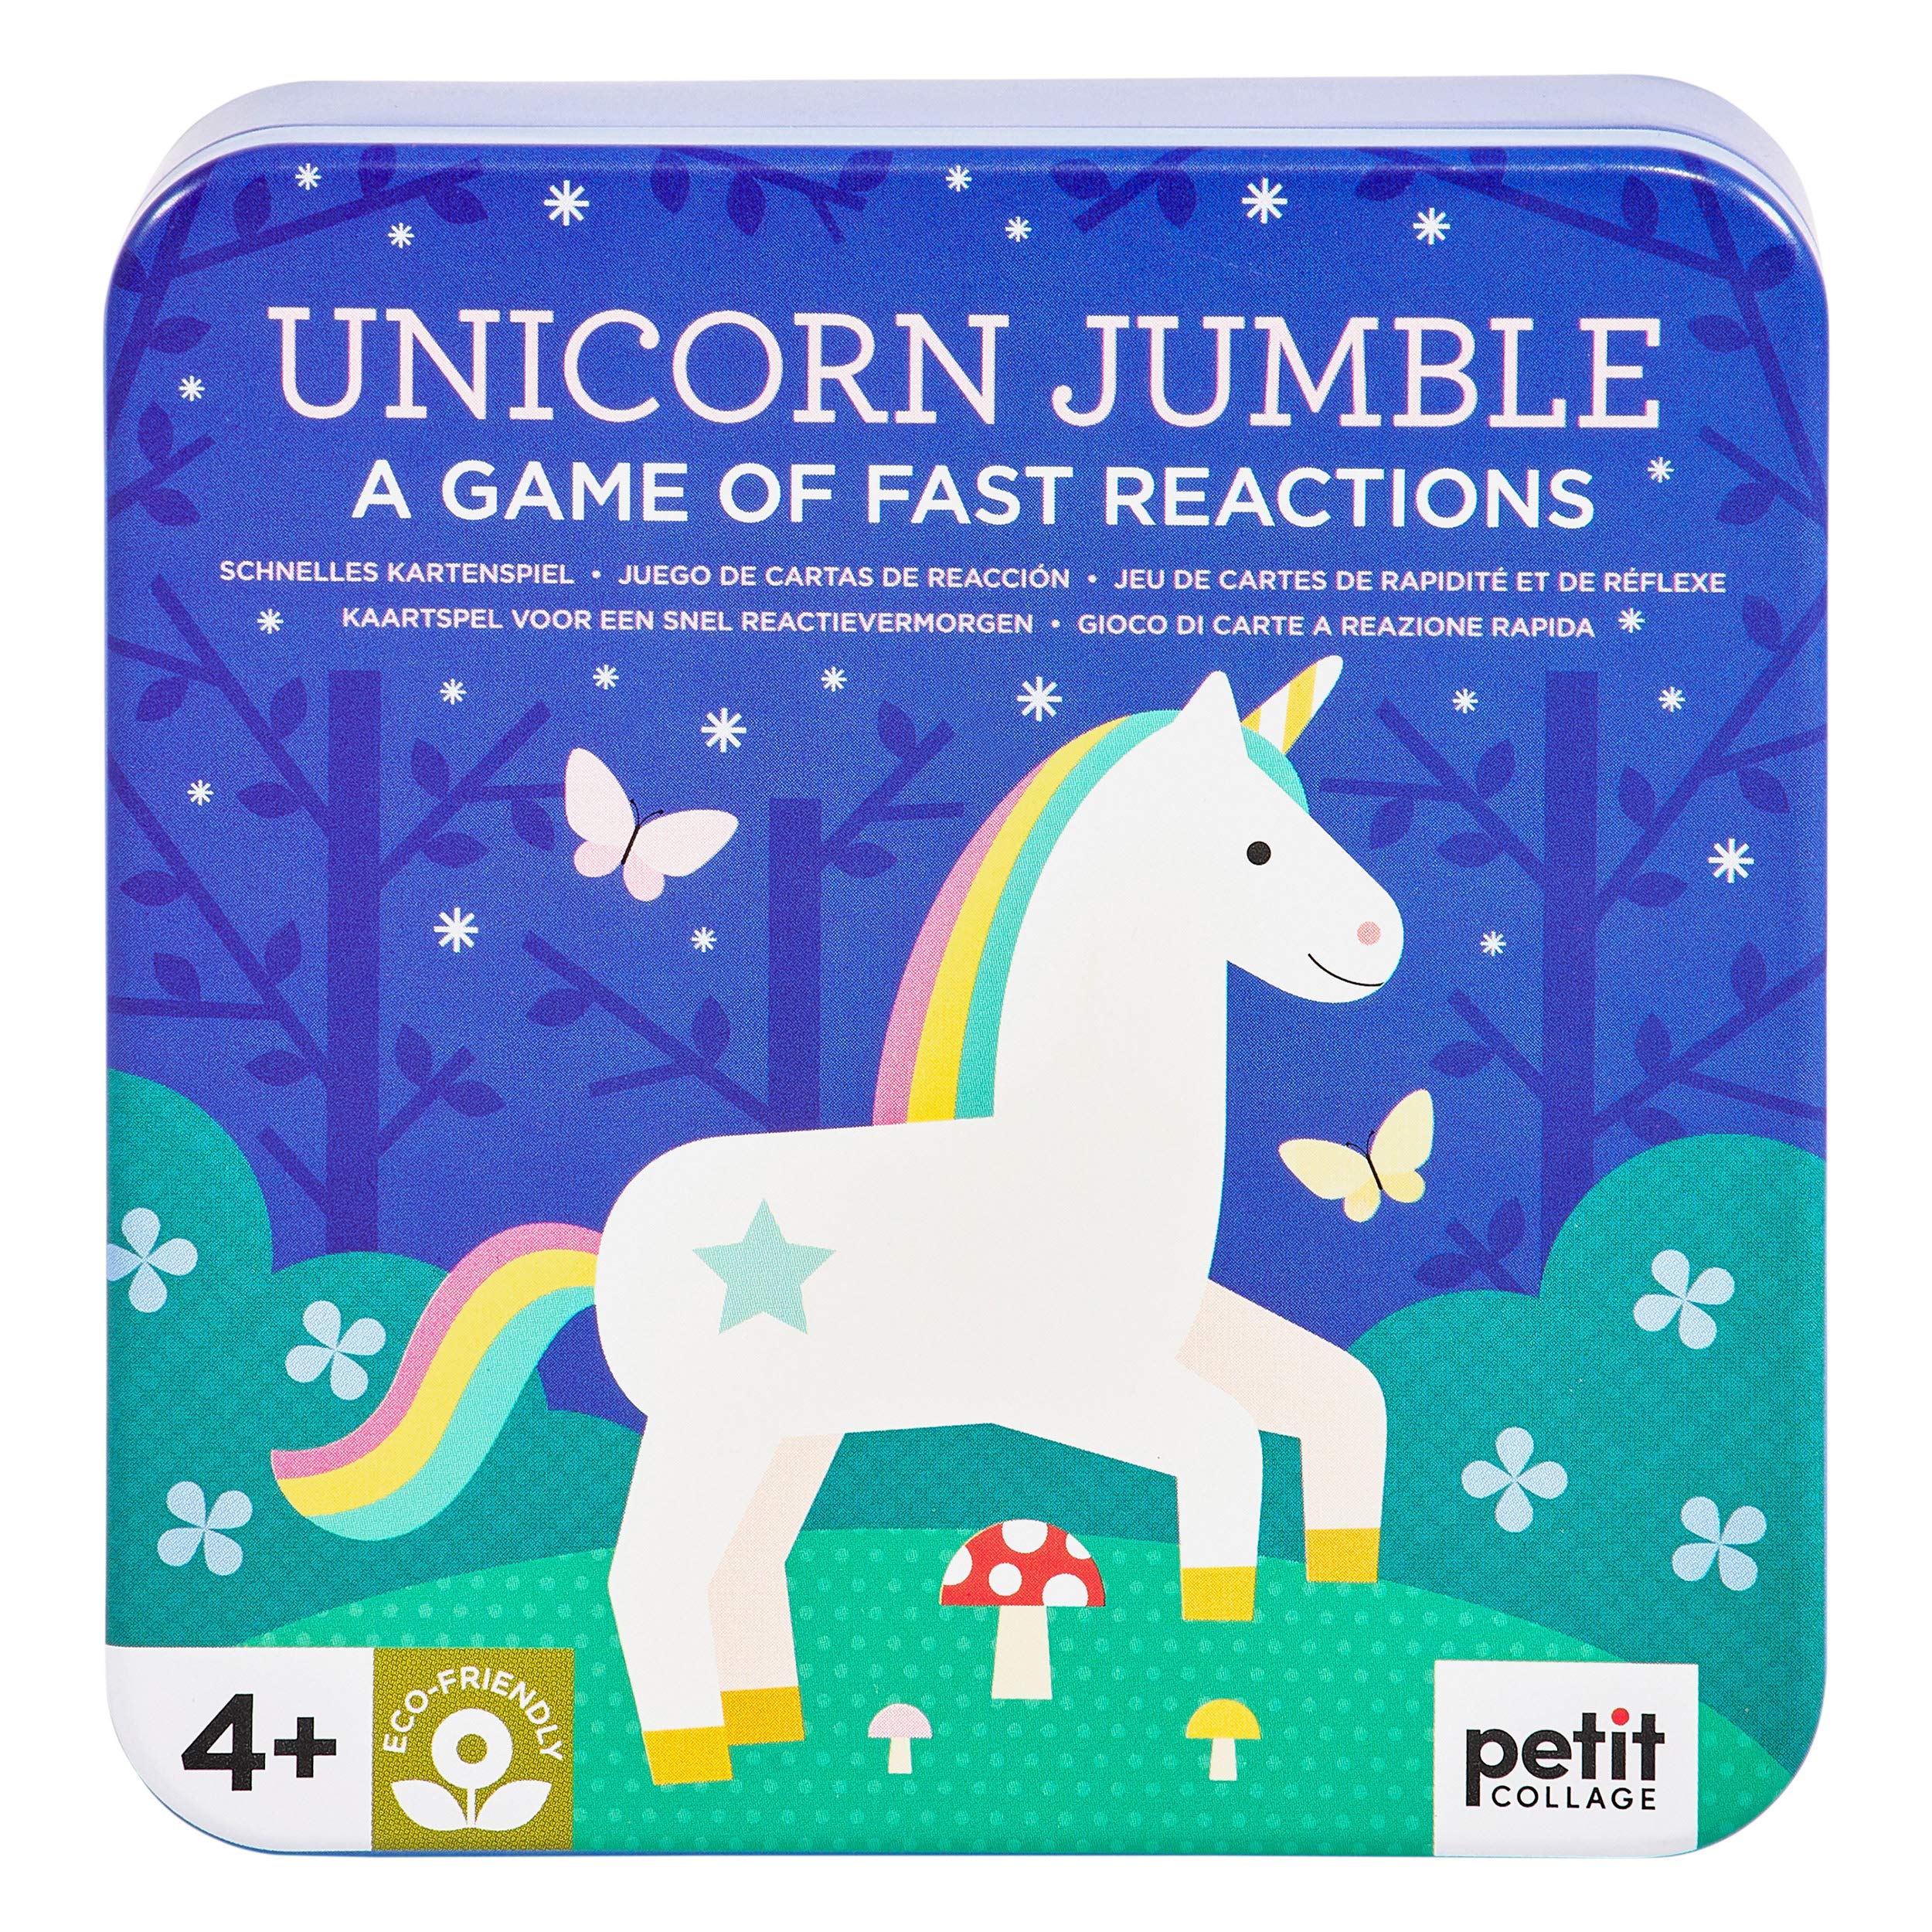 Petit Collage Unicorn Jumble Card Game: A Game of Fast Reactions – Matching Card Game for Kids – Ideal for 2-6 Players, Ages 4+ – Includes a Durable Tin for Travel and Easy Storage